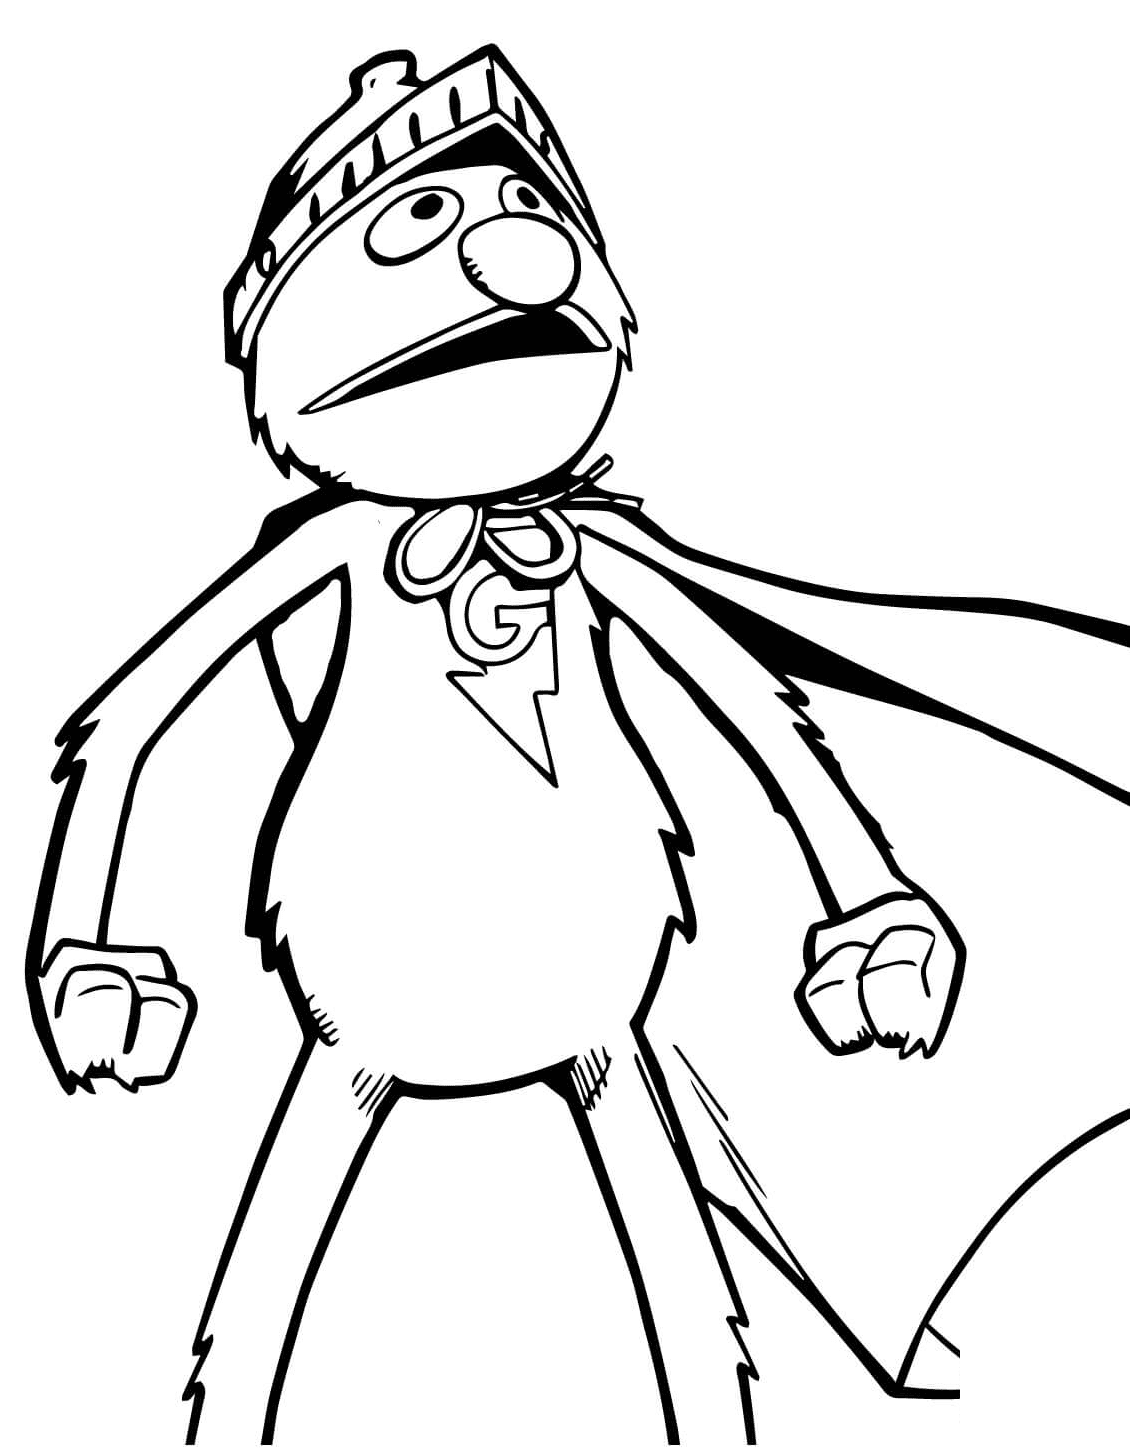 Super Grover Coloring Pages